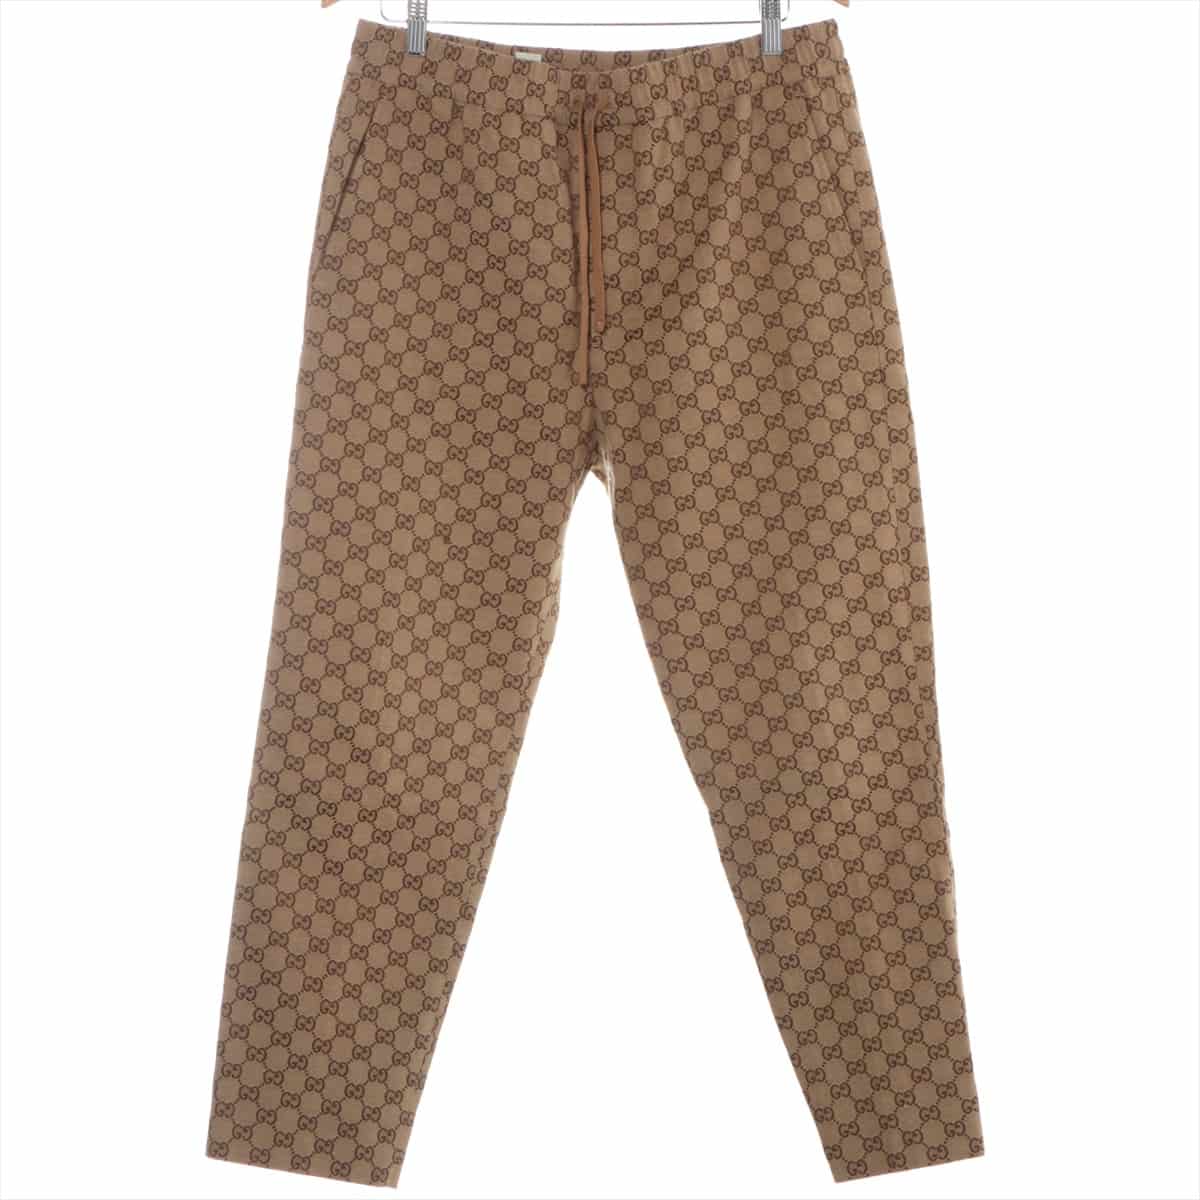 Gucci 19-year Cotton & Polyester Pants 48 Men's Camel  GG Canvas